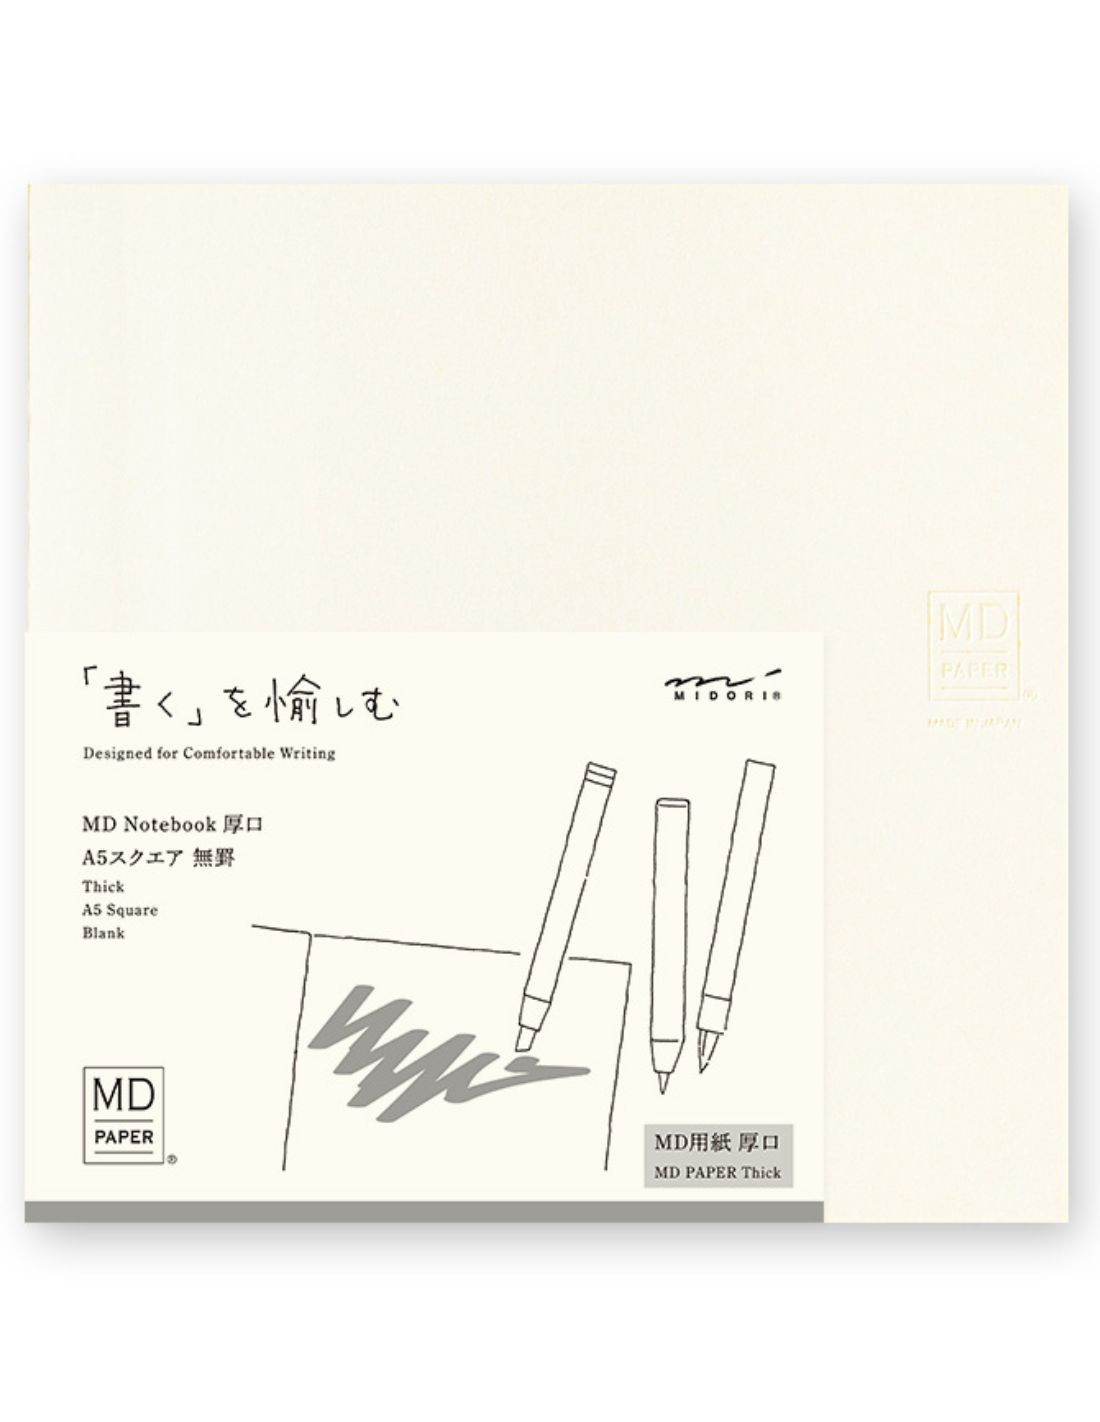 Notebook A5 MD Paper Thick - A5 Square - Blank - Midori Papeterie Makkura